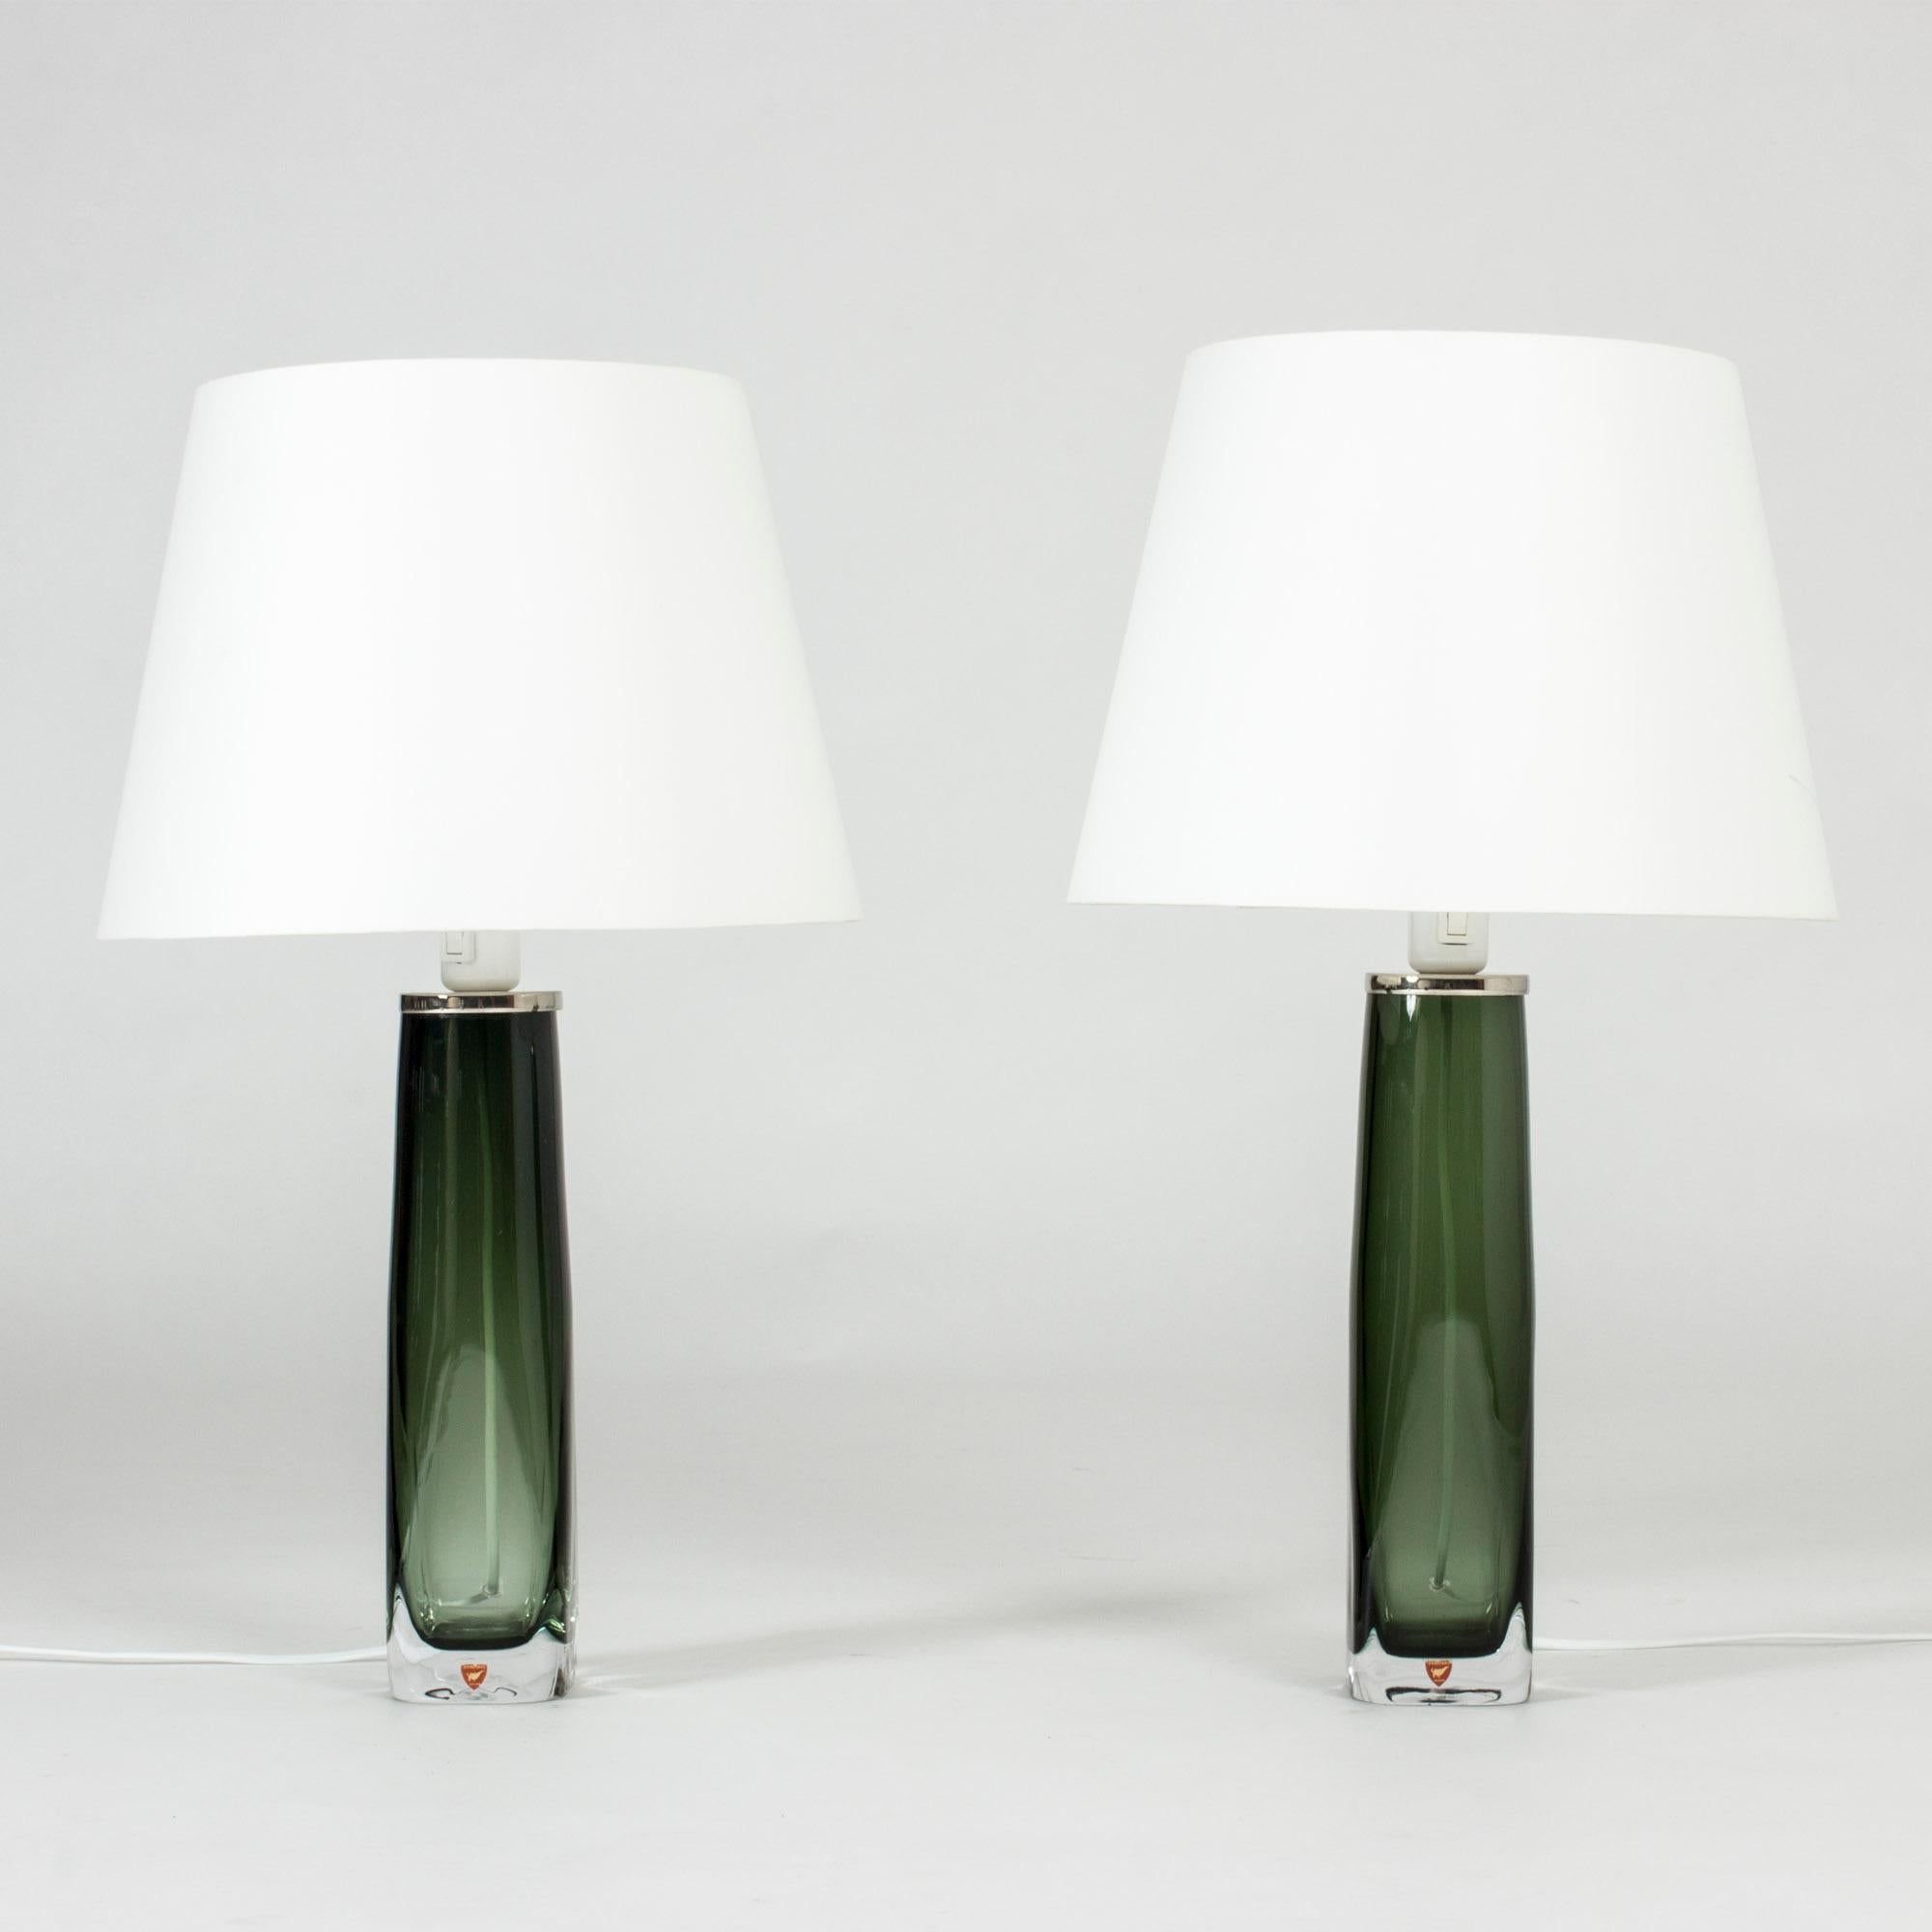 Pair of elegant translucent green glass table lamps by Carl Fagerlund for Orrefors. Heavy glass bases with a slender shape and white metal detail at the top. Beautiful in a window.